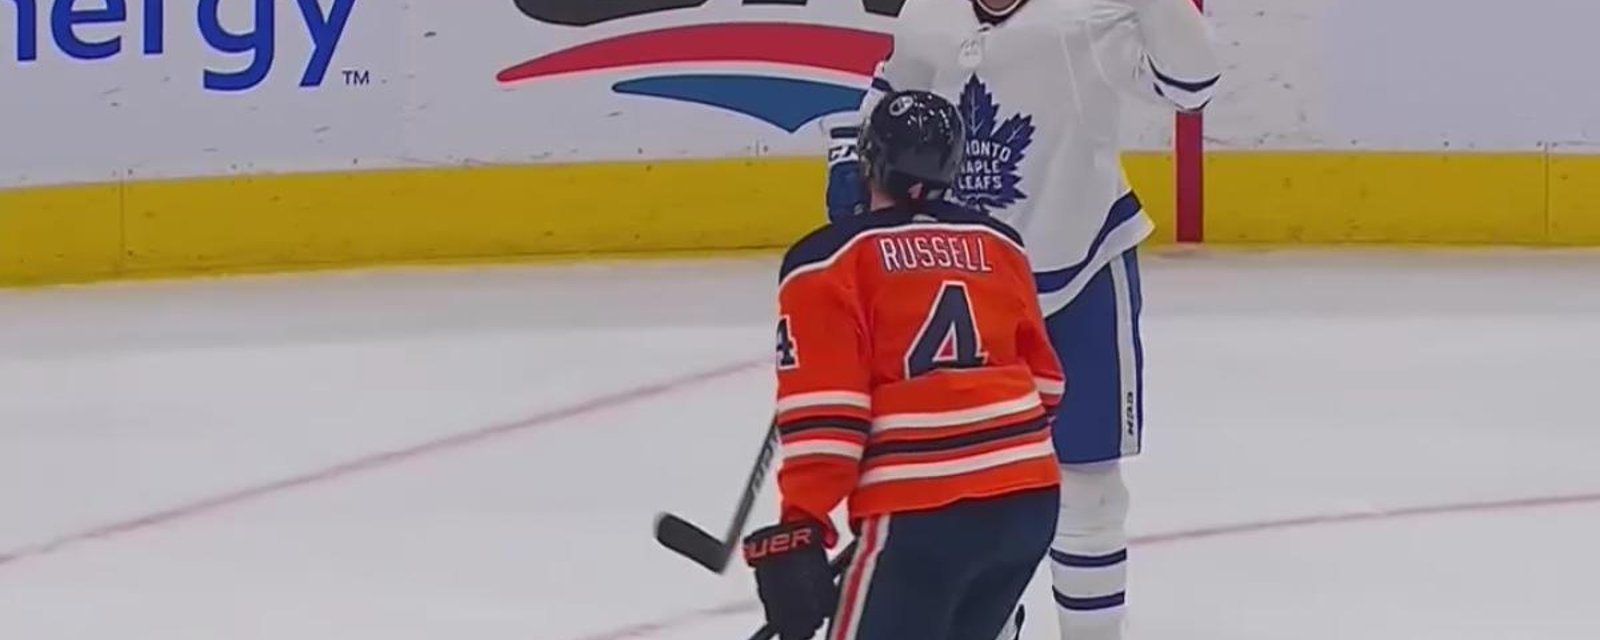 Must see: Russell snipes puck into his own net, gives Leafs the win